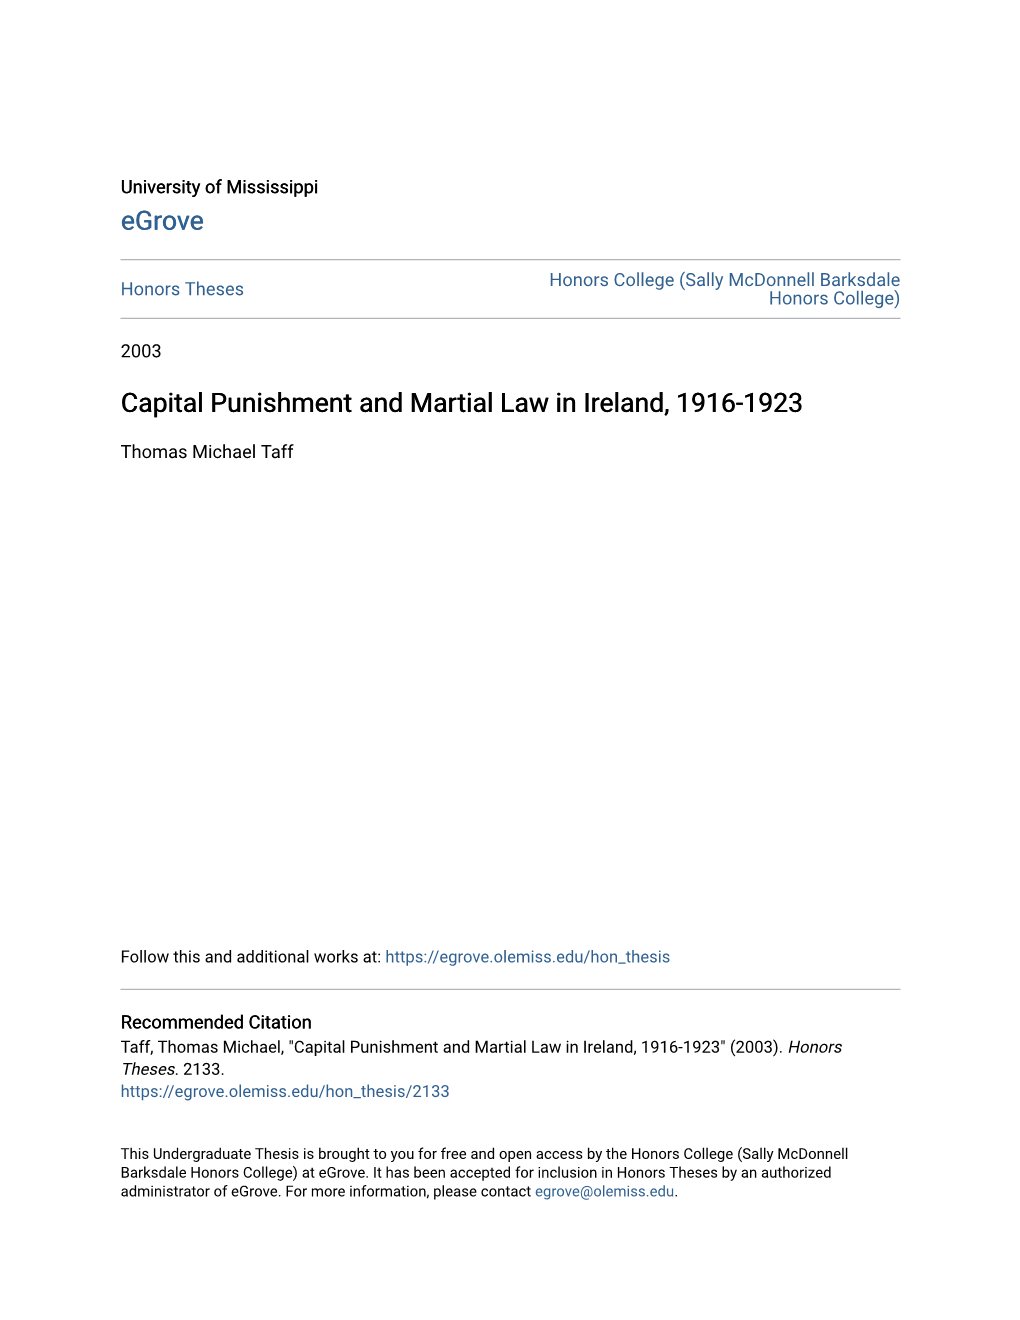 Capital Punishment and Martial Law in Ireland, 1916-1923